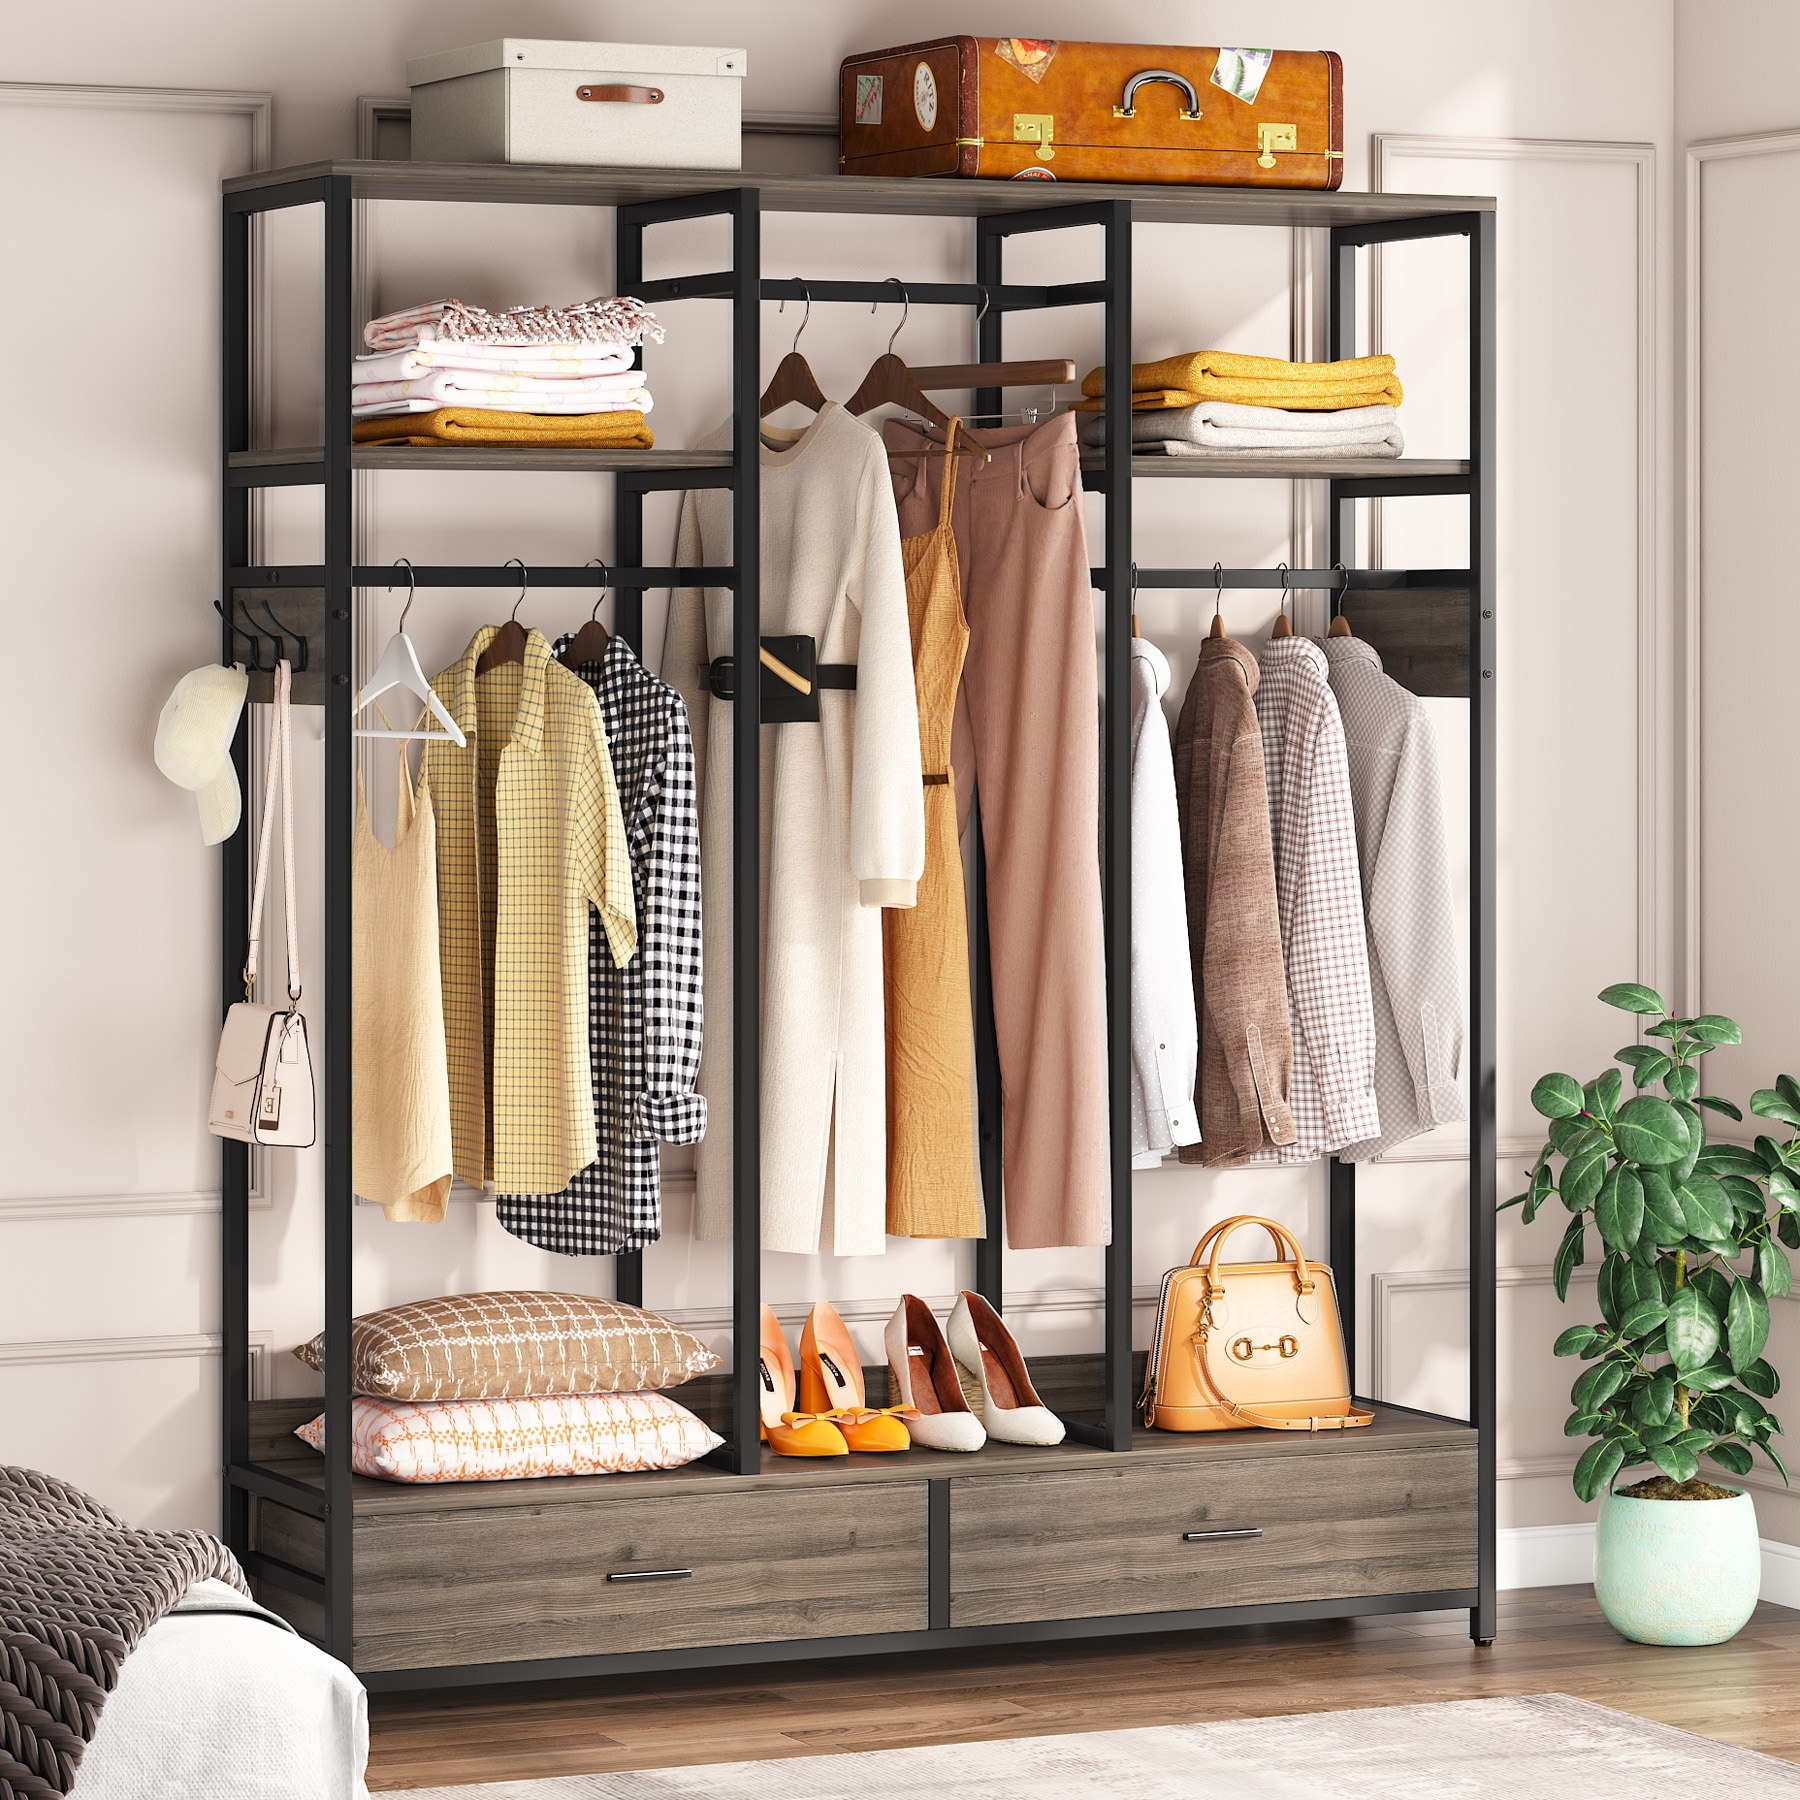 https://ak1.ostkcdn.com/images/products/is/images/direct/7669e41558b3a3dda3fd9a80291ba2d515487e90/Freestanding-Closet-Organizer-with-Drawers-and-Hanging-Rod-Clothes-Garment-Rack-Organizer.jpg